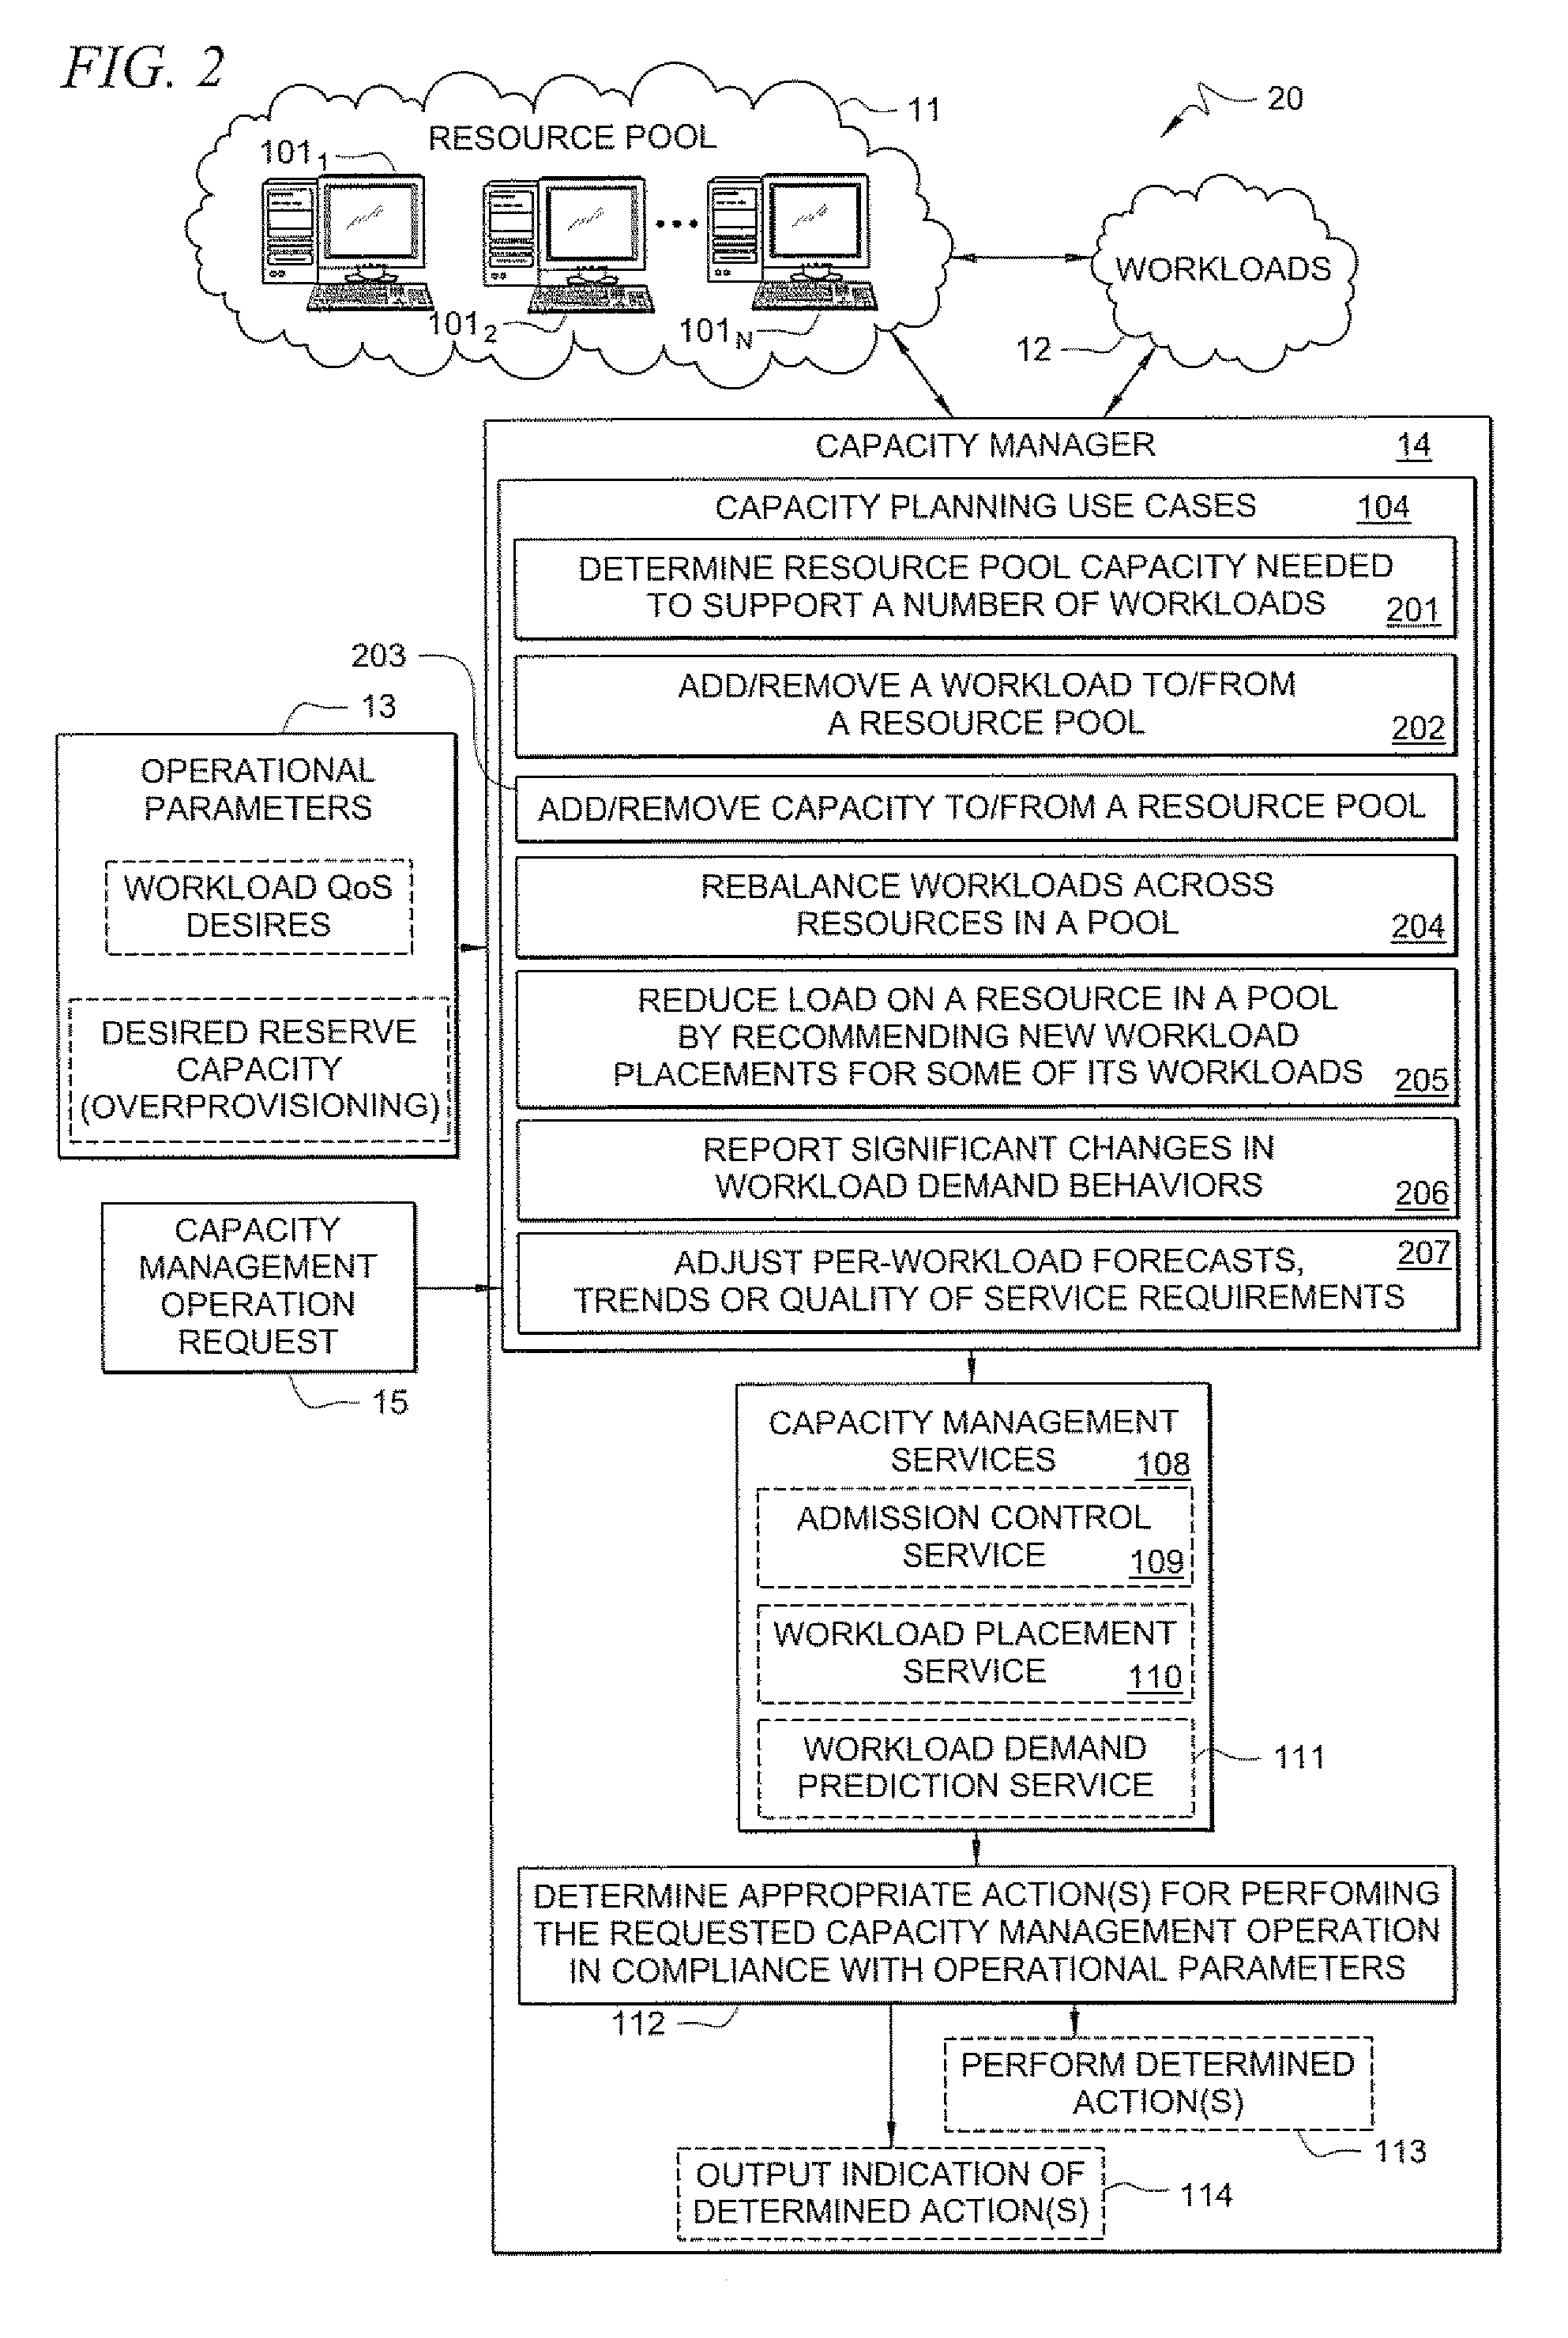 Systems and methods for providing capacity management of resource pools for servicing workloads